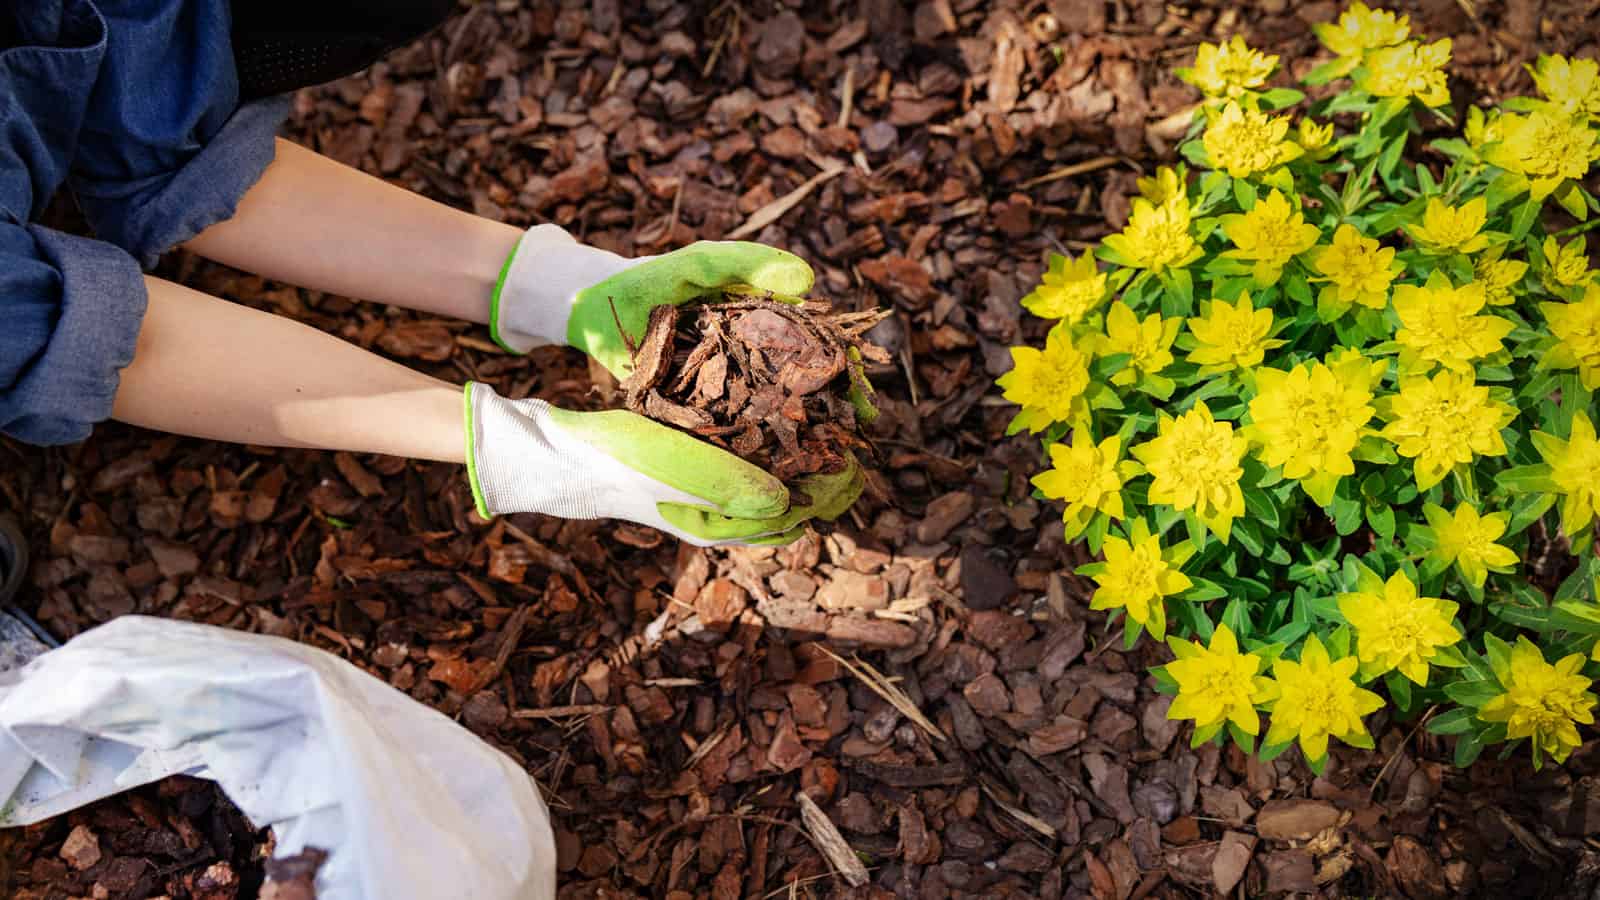 Gardener applying mulch to the ground in the garden for winter preparation, 10 Essential Tips for Protecting Your Garden from Harsh Winter Weather - 1600x900